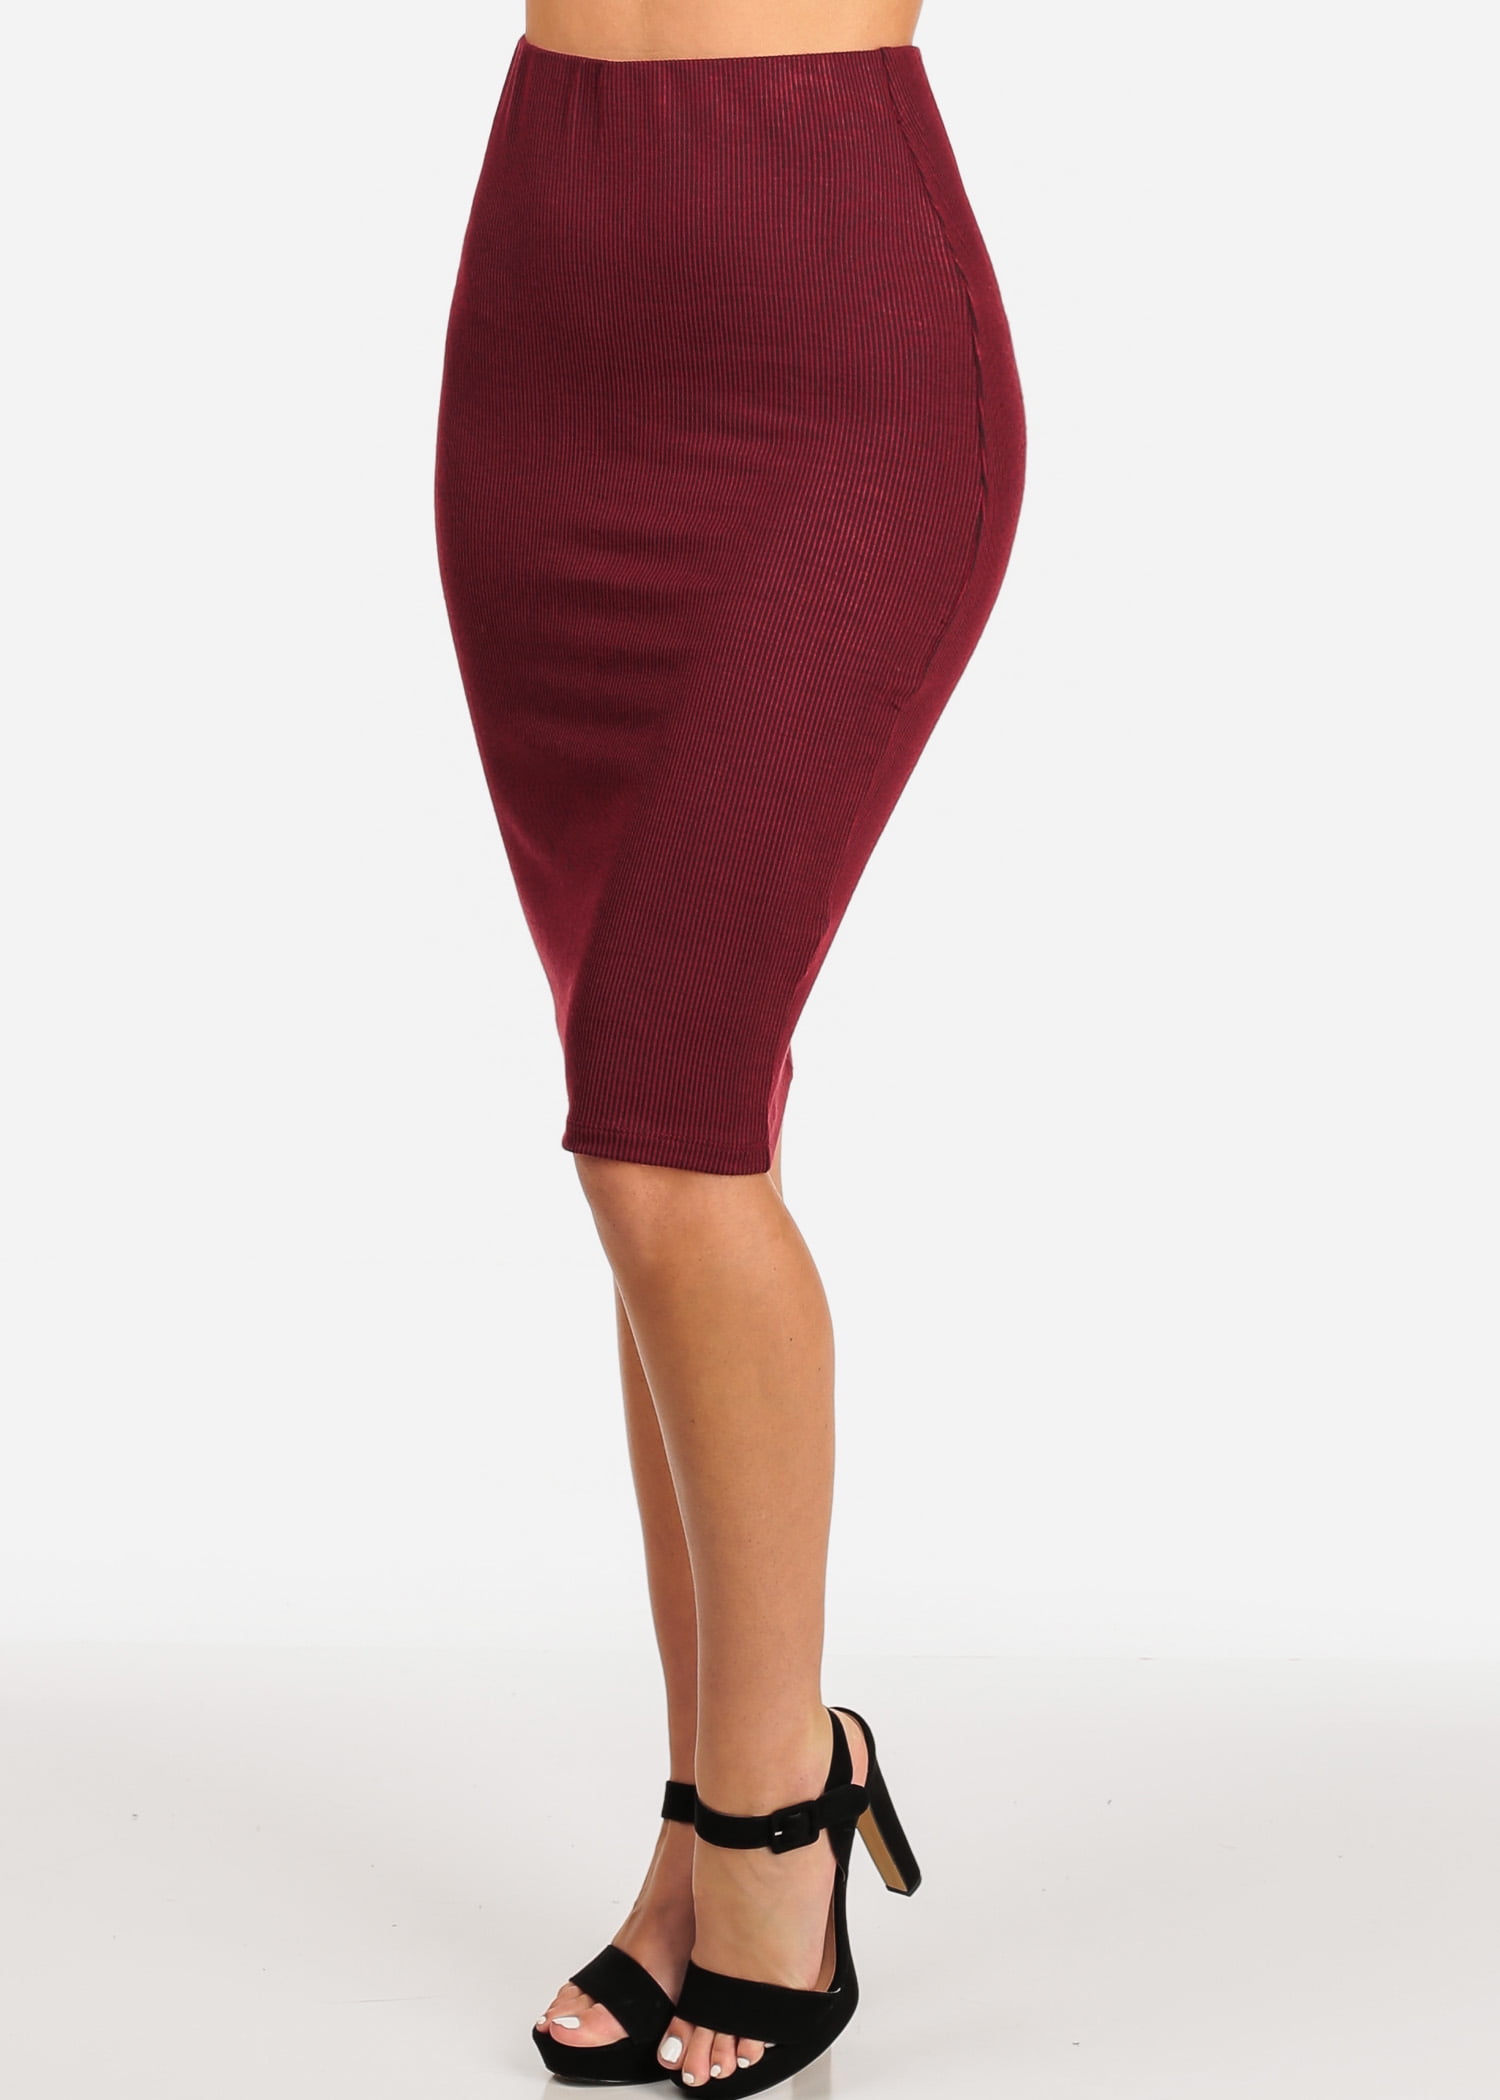 ModaXpressOnline - Womens Pencil Skirt Professional Business Office ...